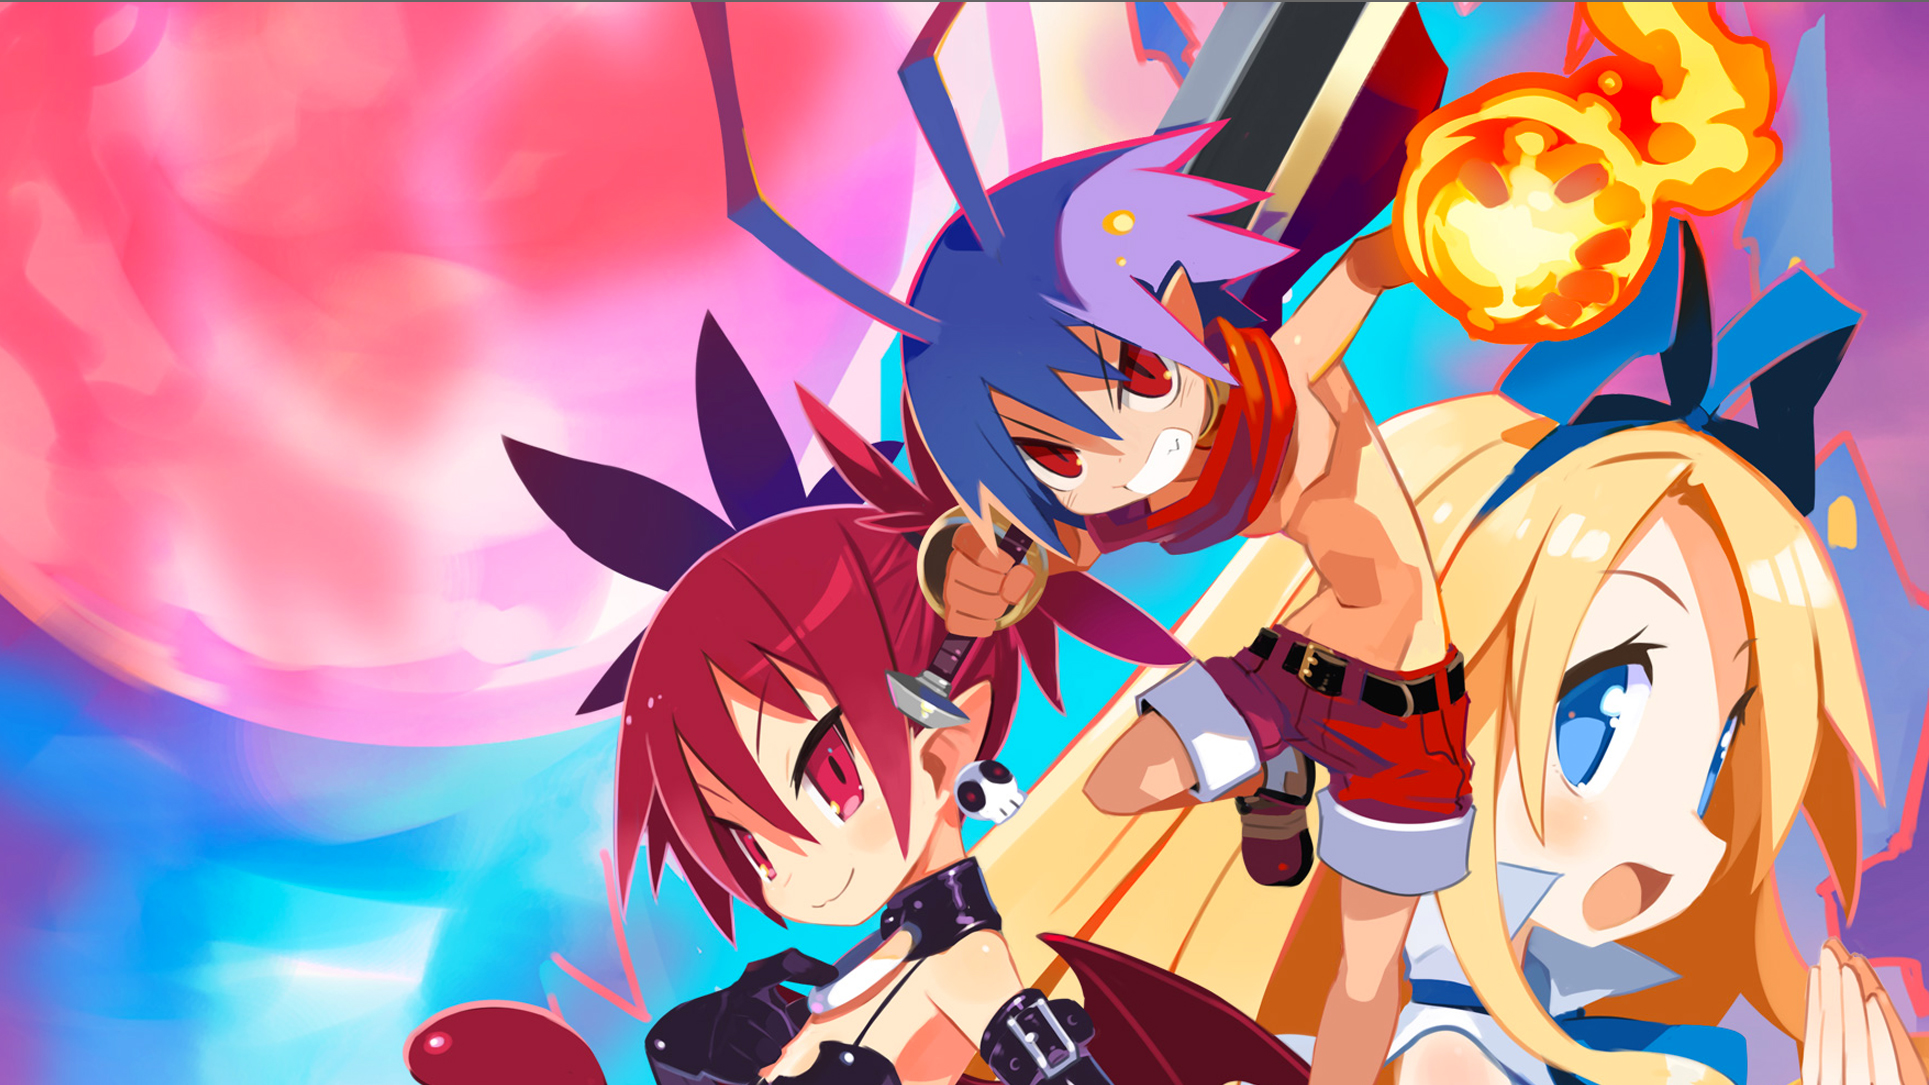 disgaea-1-complete-release-date-announced-cat-with-monocle